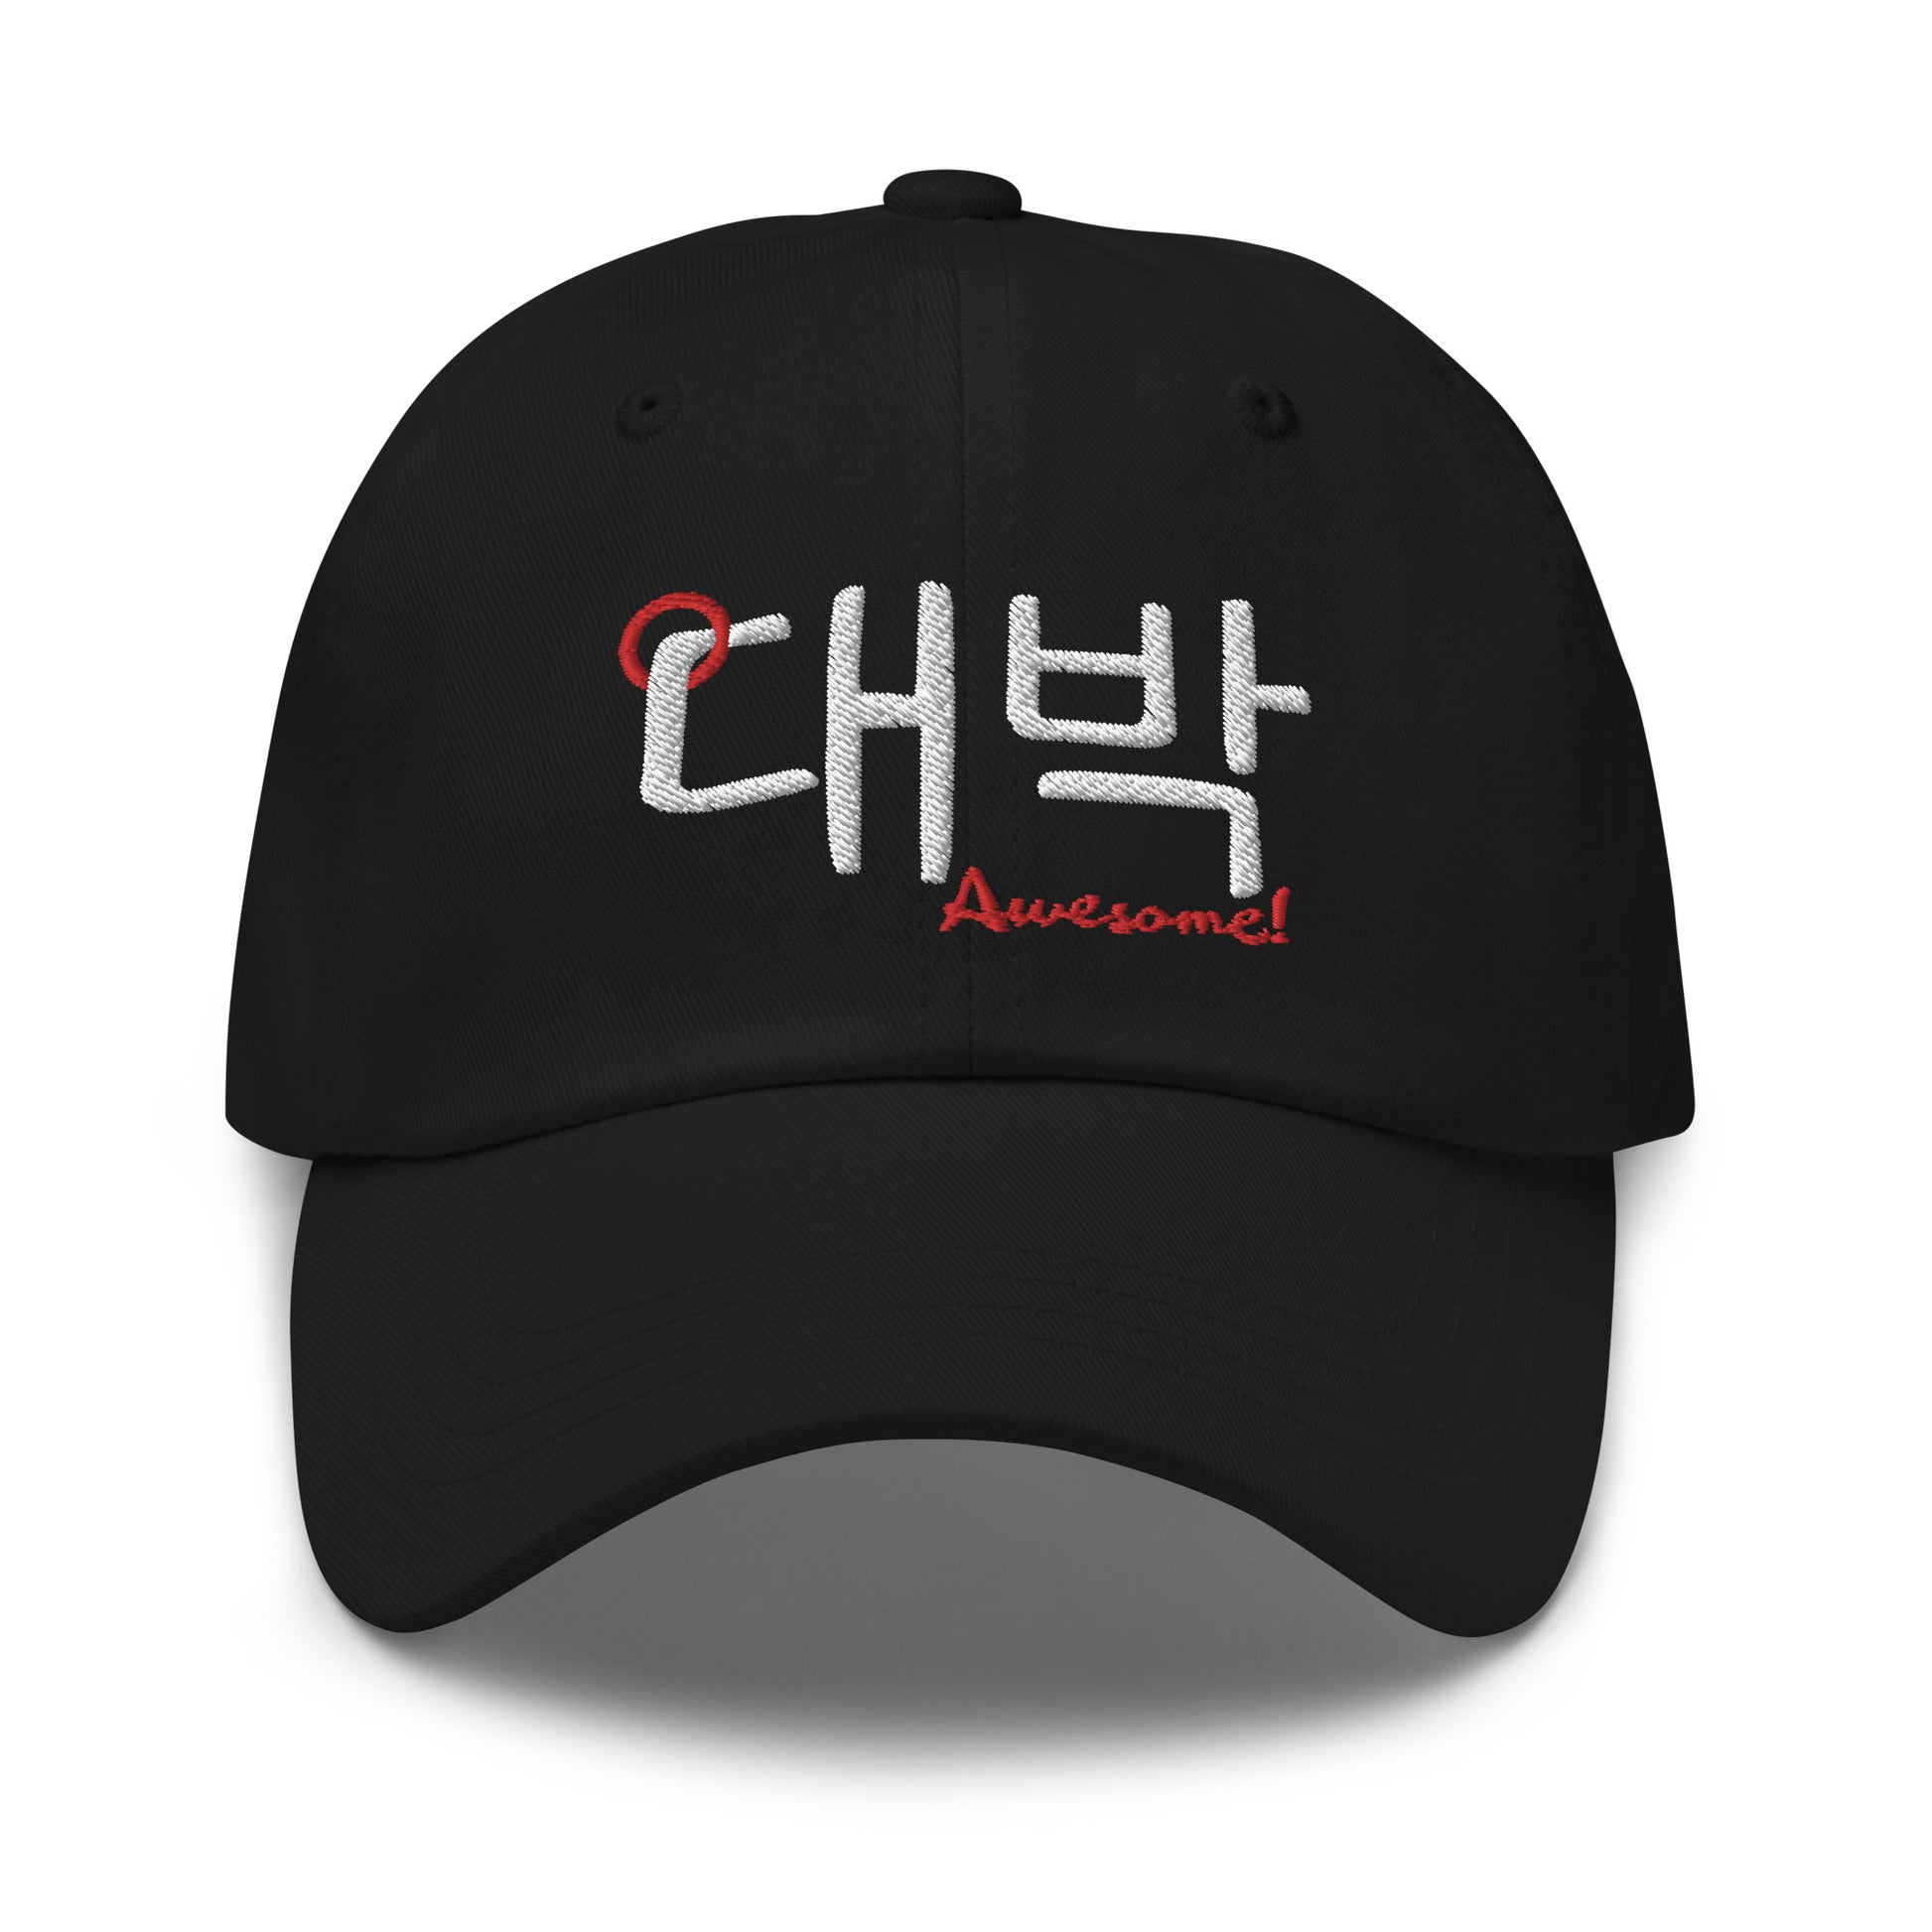 Black baseball cap with the word for 'Awesome!' in Hangul and English embroidered on the front